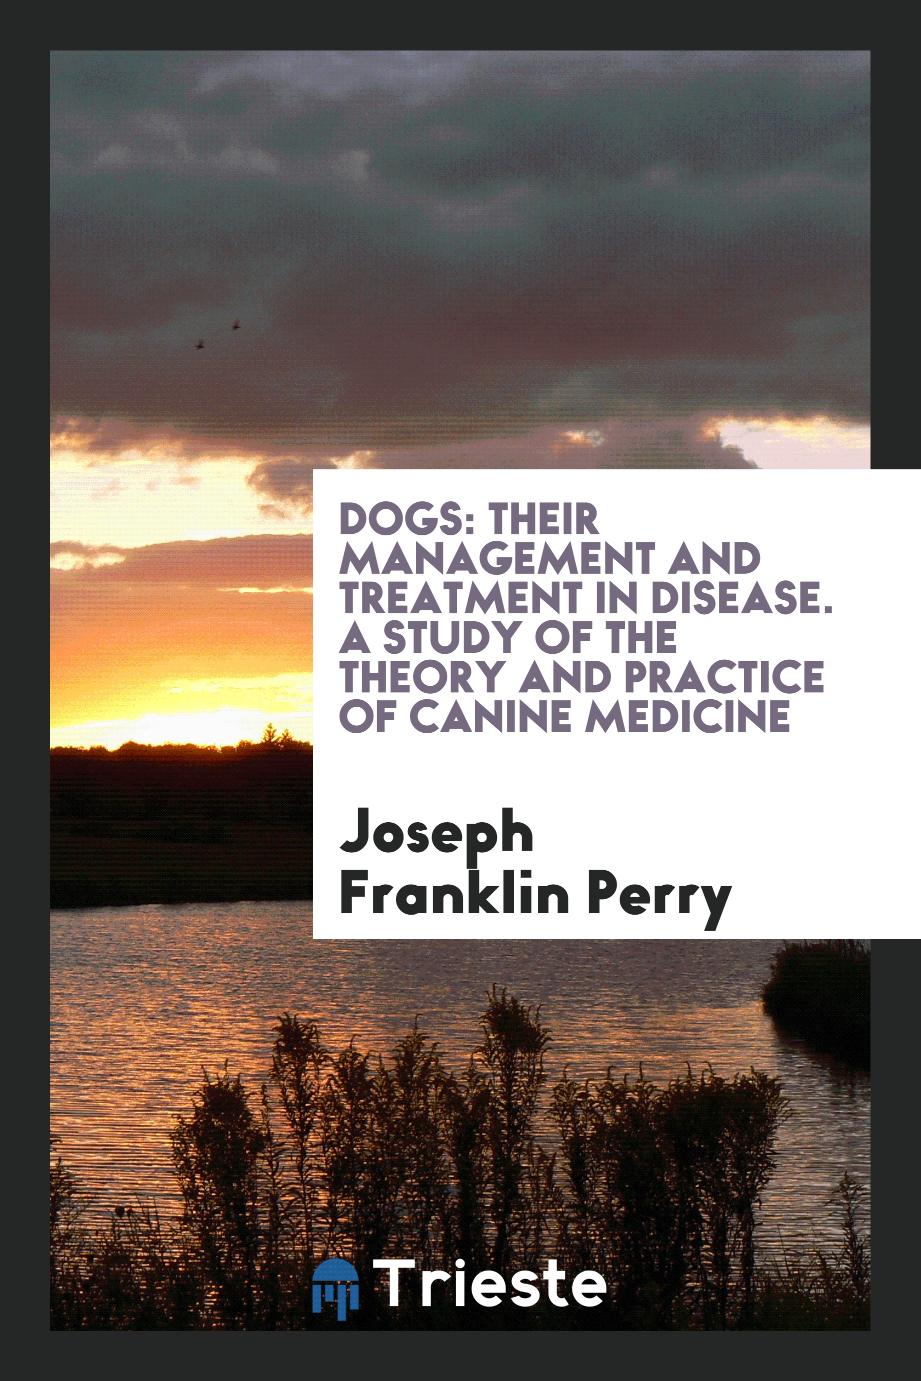 Dogs: their management and treatment in disease. A study of the theory and practice of canine medicine